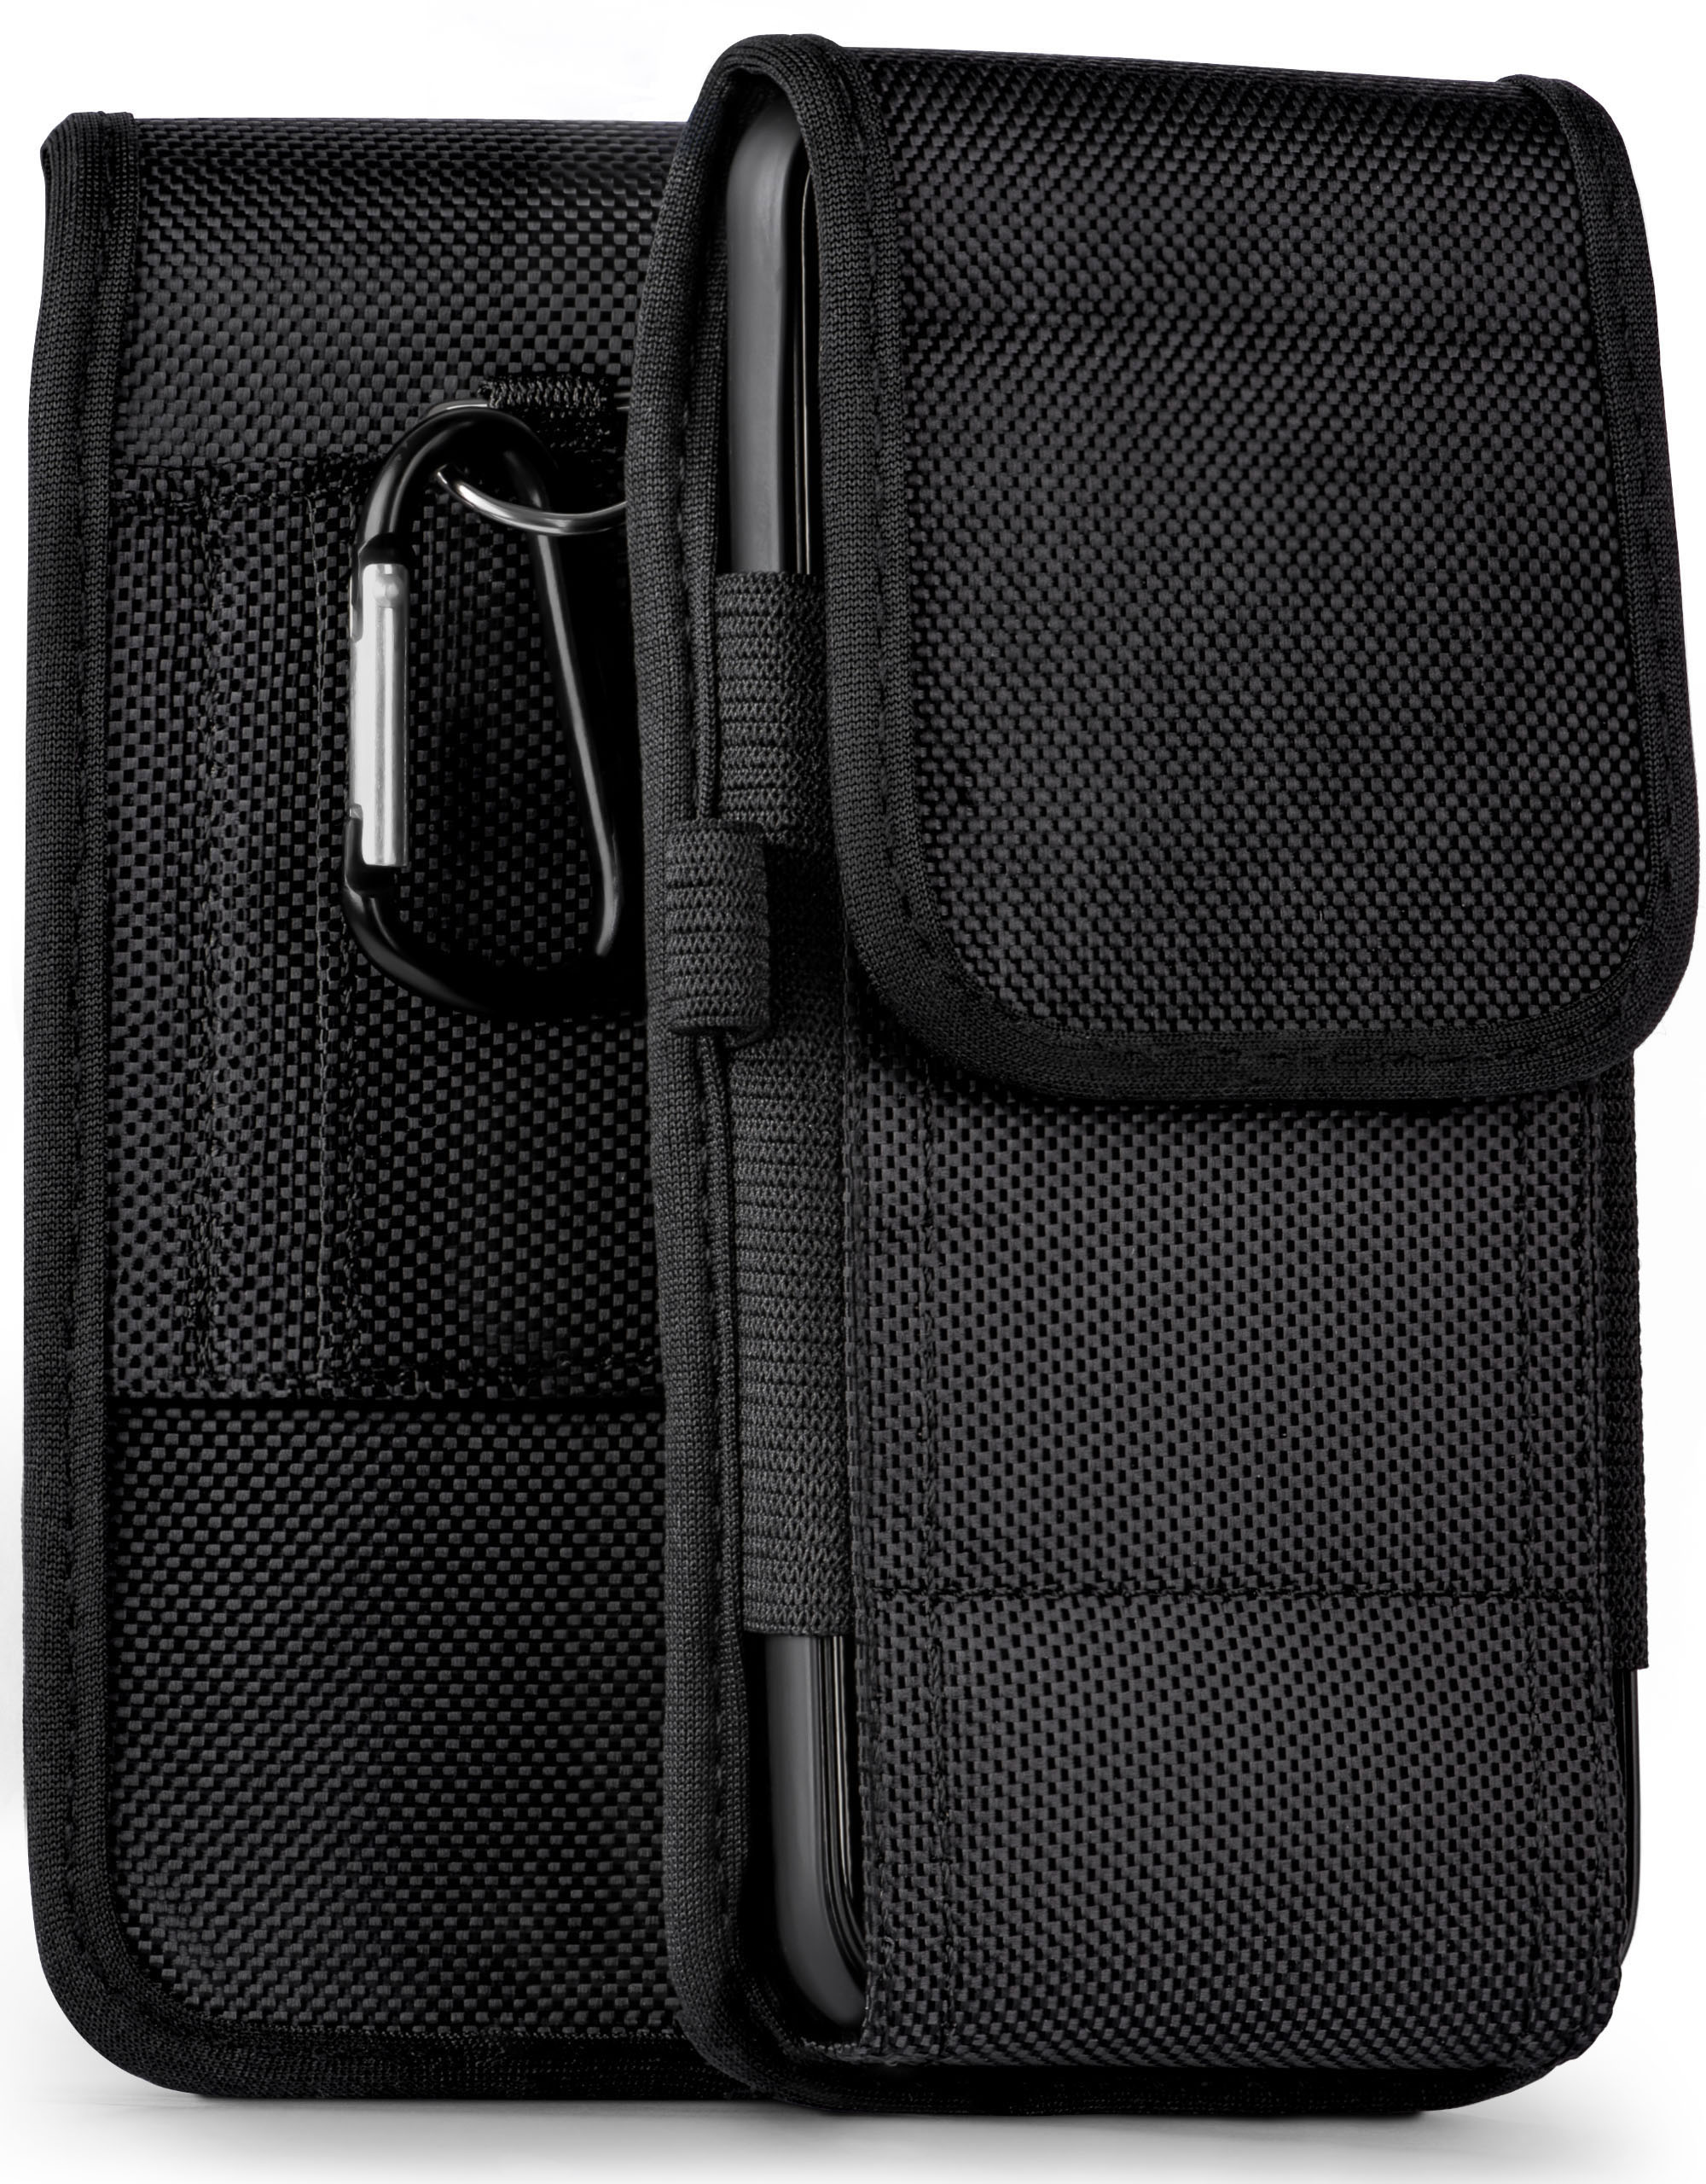 Trail 6 Case, ASUS, MOEX (2019), Asus Zenfone Agility Holster,